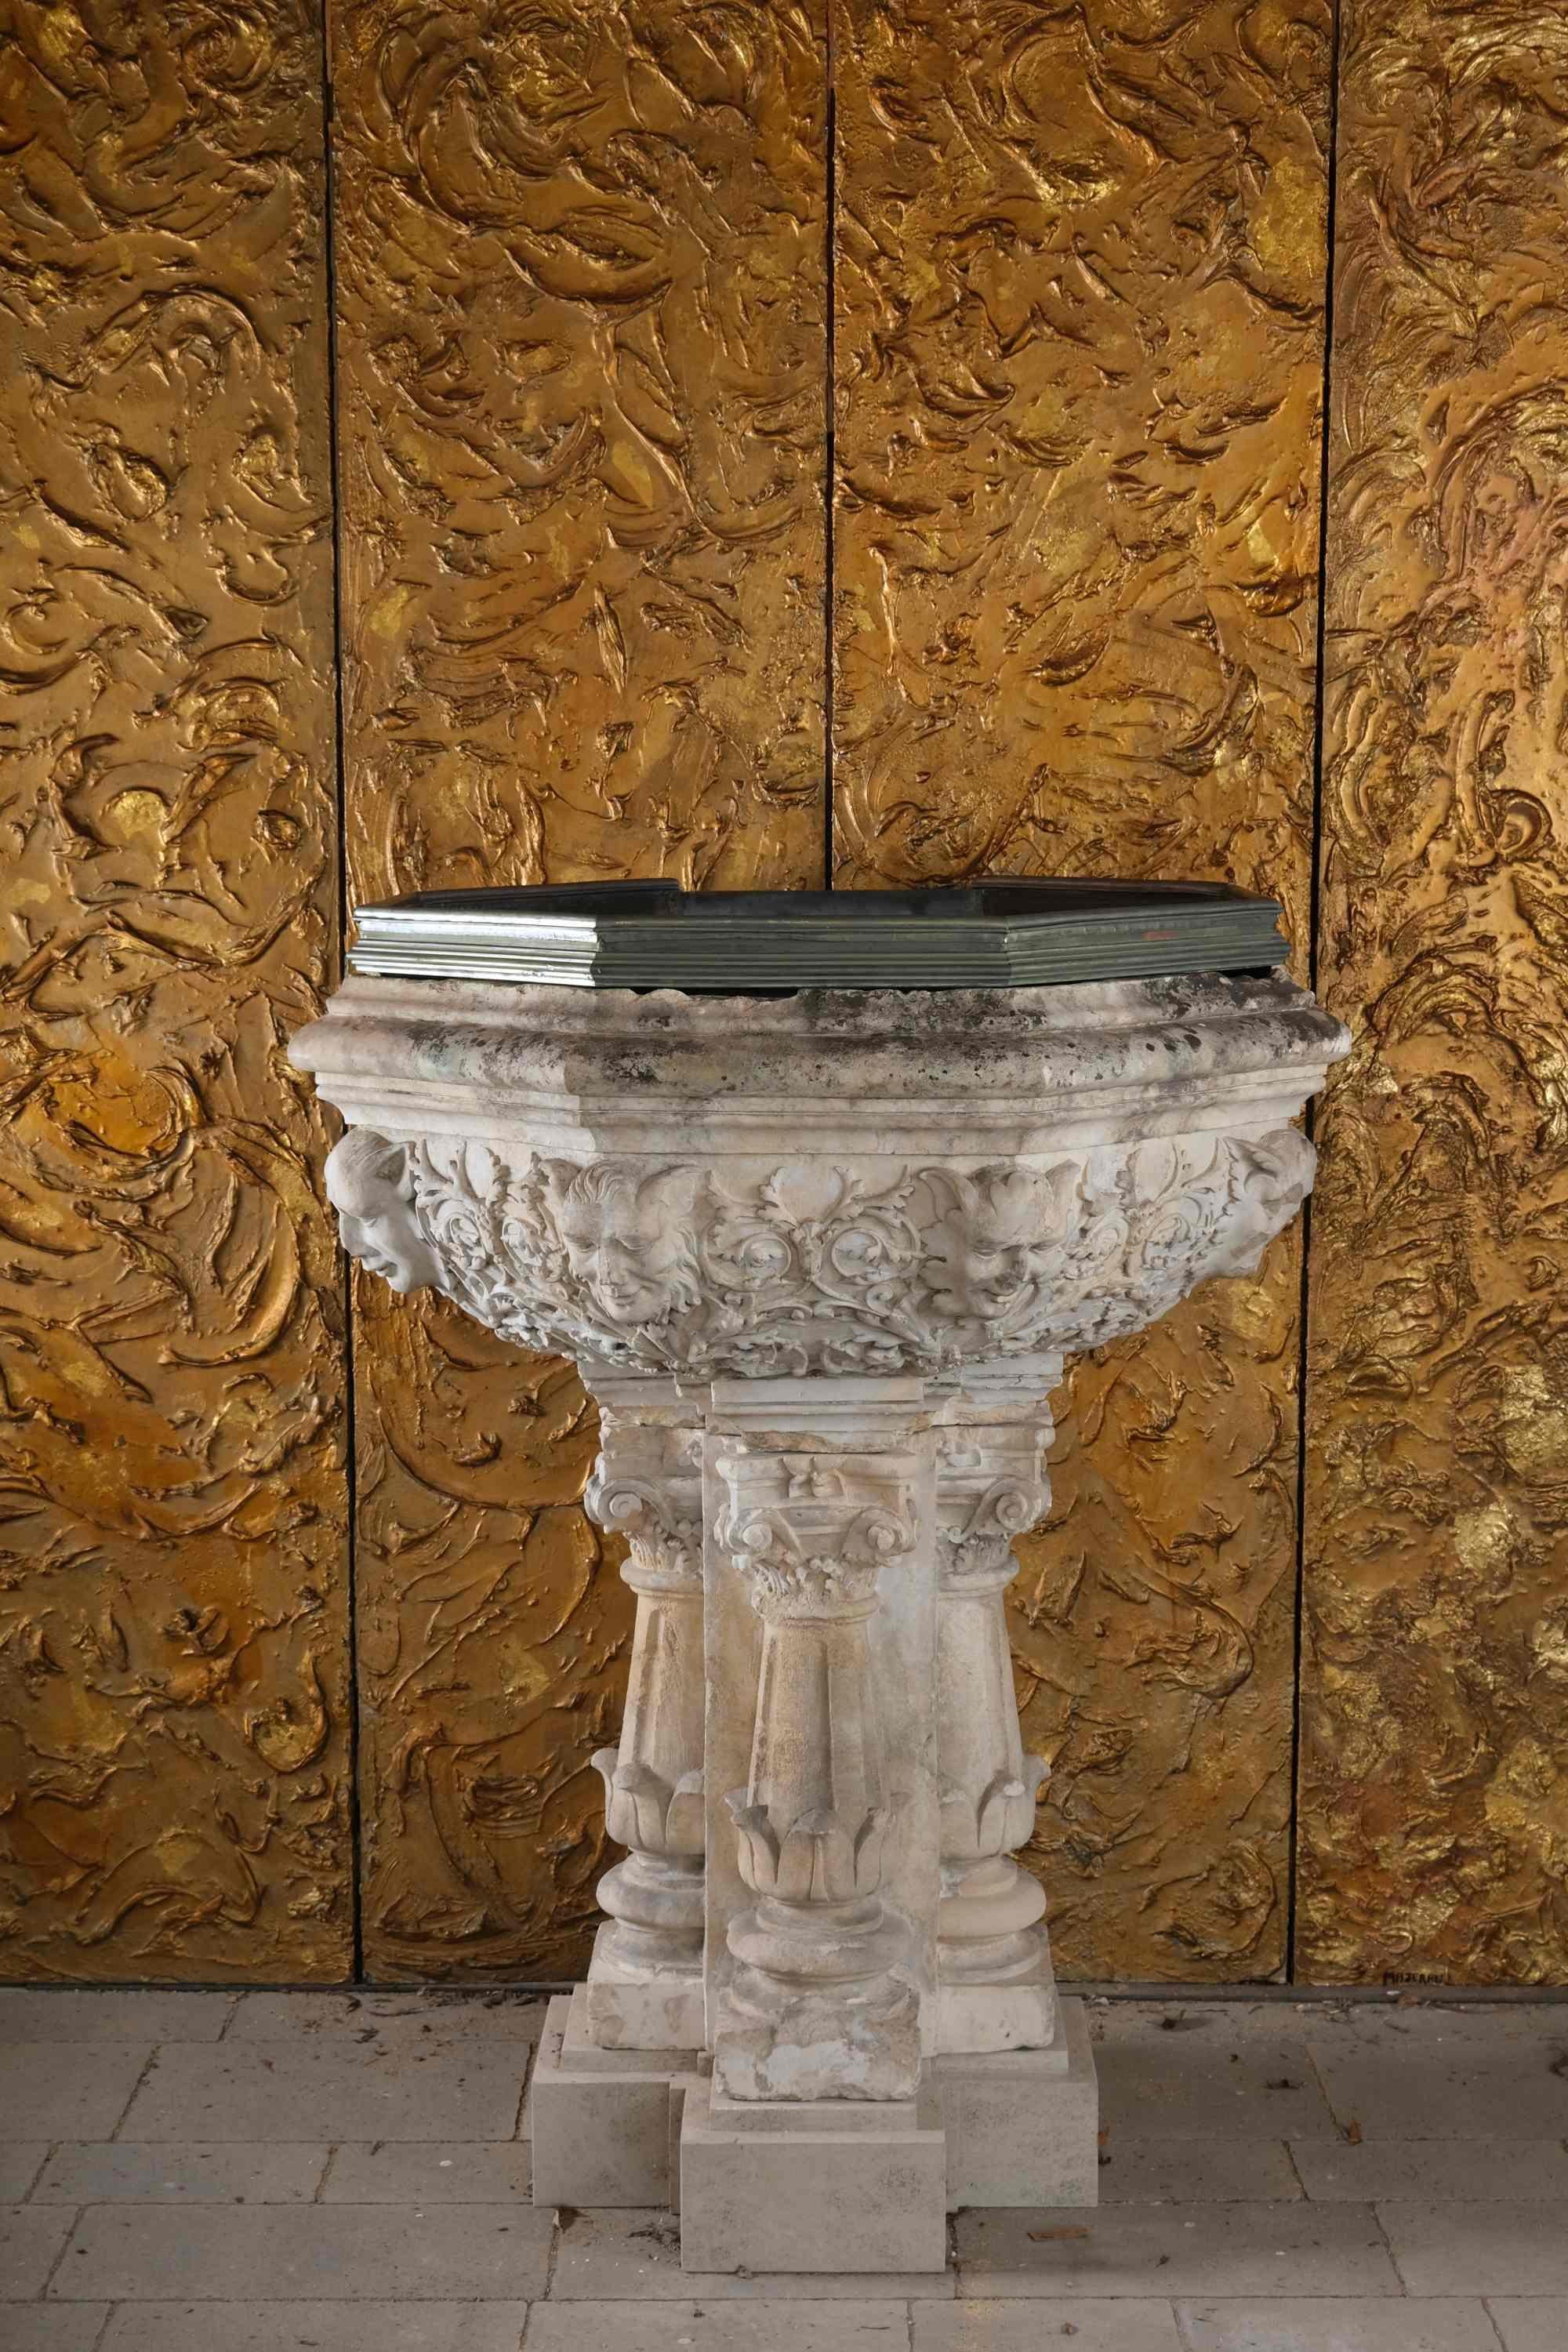 Round pilasters projecting on four sides, set on an offset plinth, support the flared octagonal basin. The quarter-round base is decorated with dense, mannerist foliage, partly still adorned with scrolled acanthus scrolls. At the corners, mystical